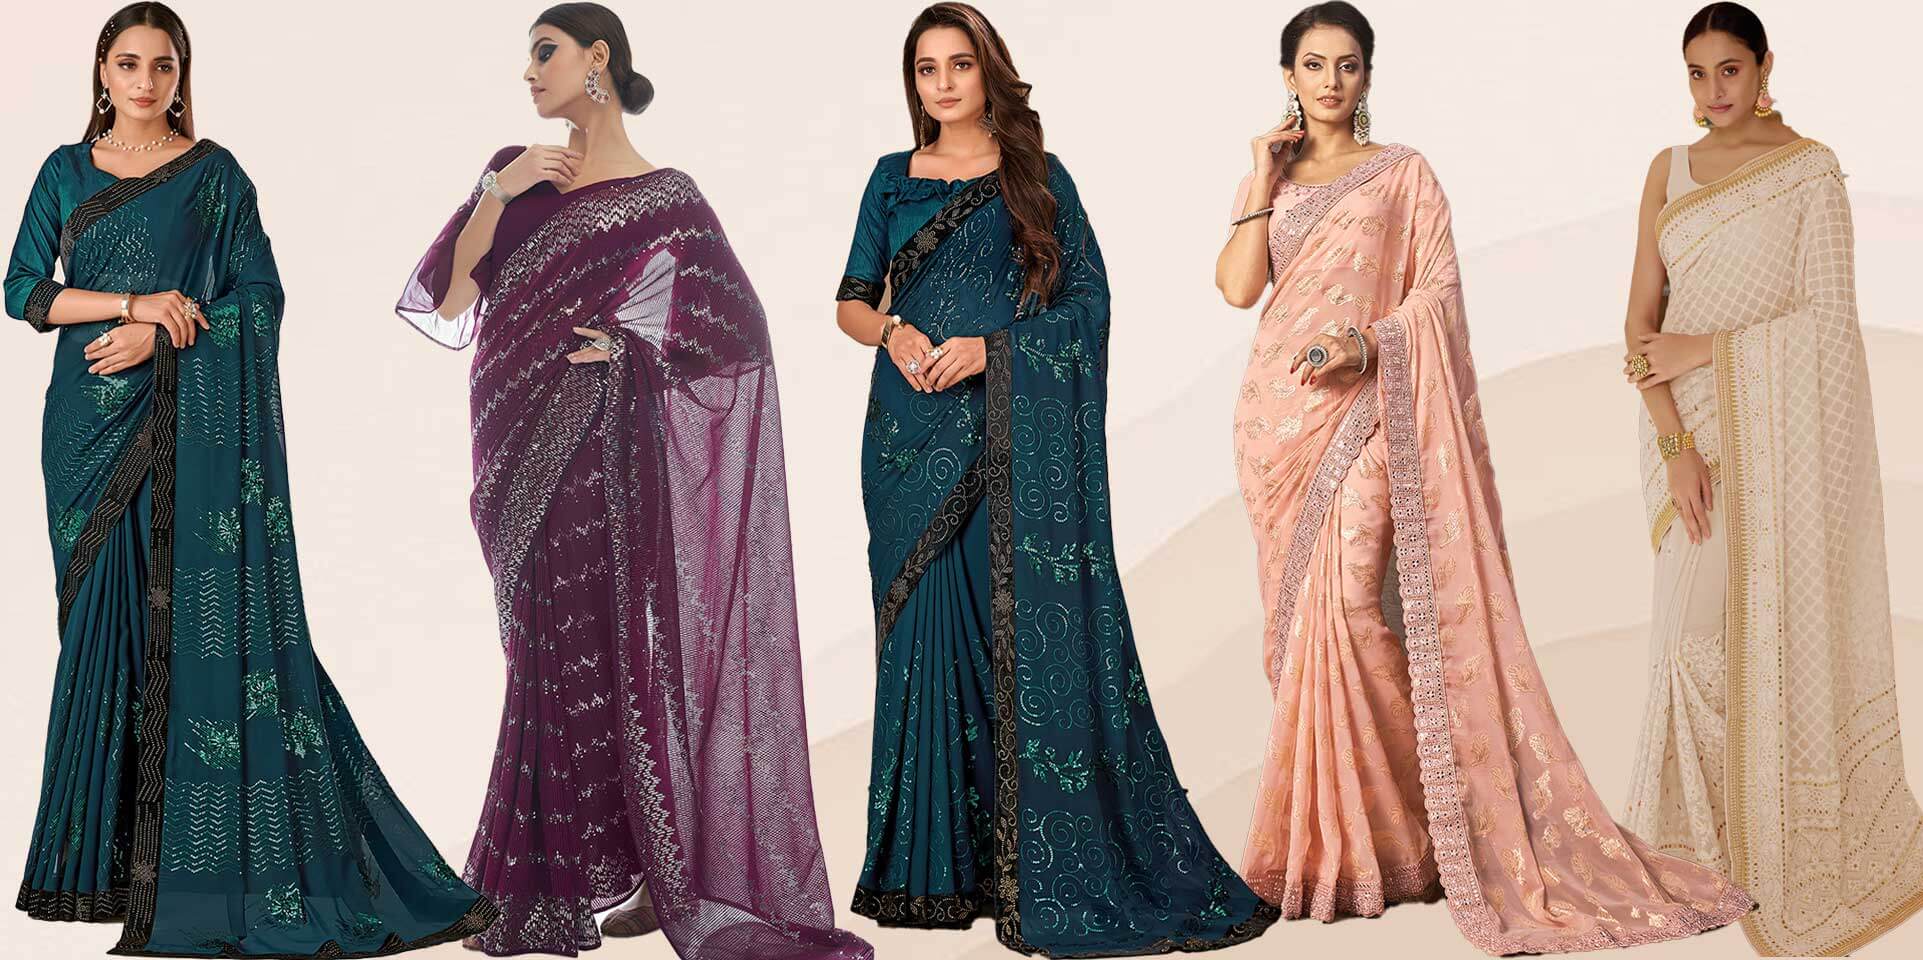 What is the Best Place to Buy Indian Georgette Sarees in USA?